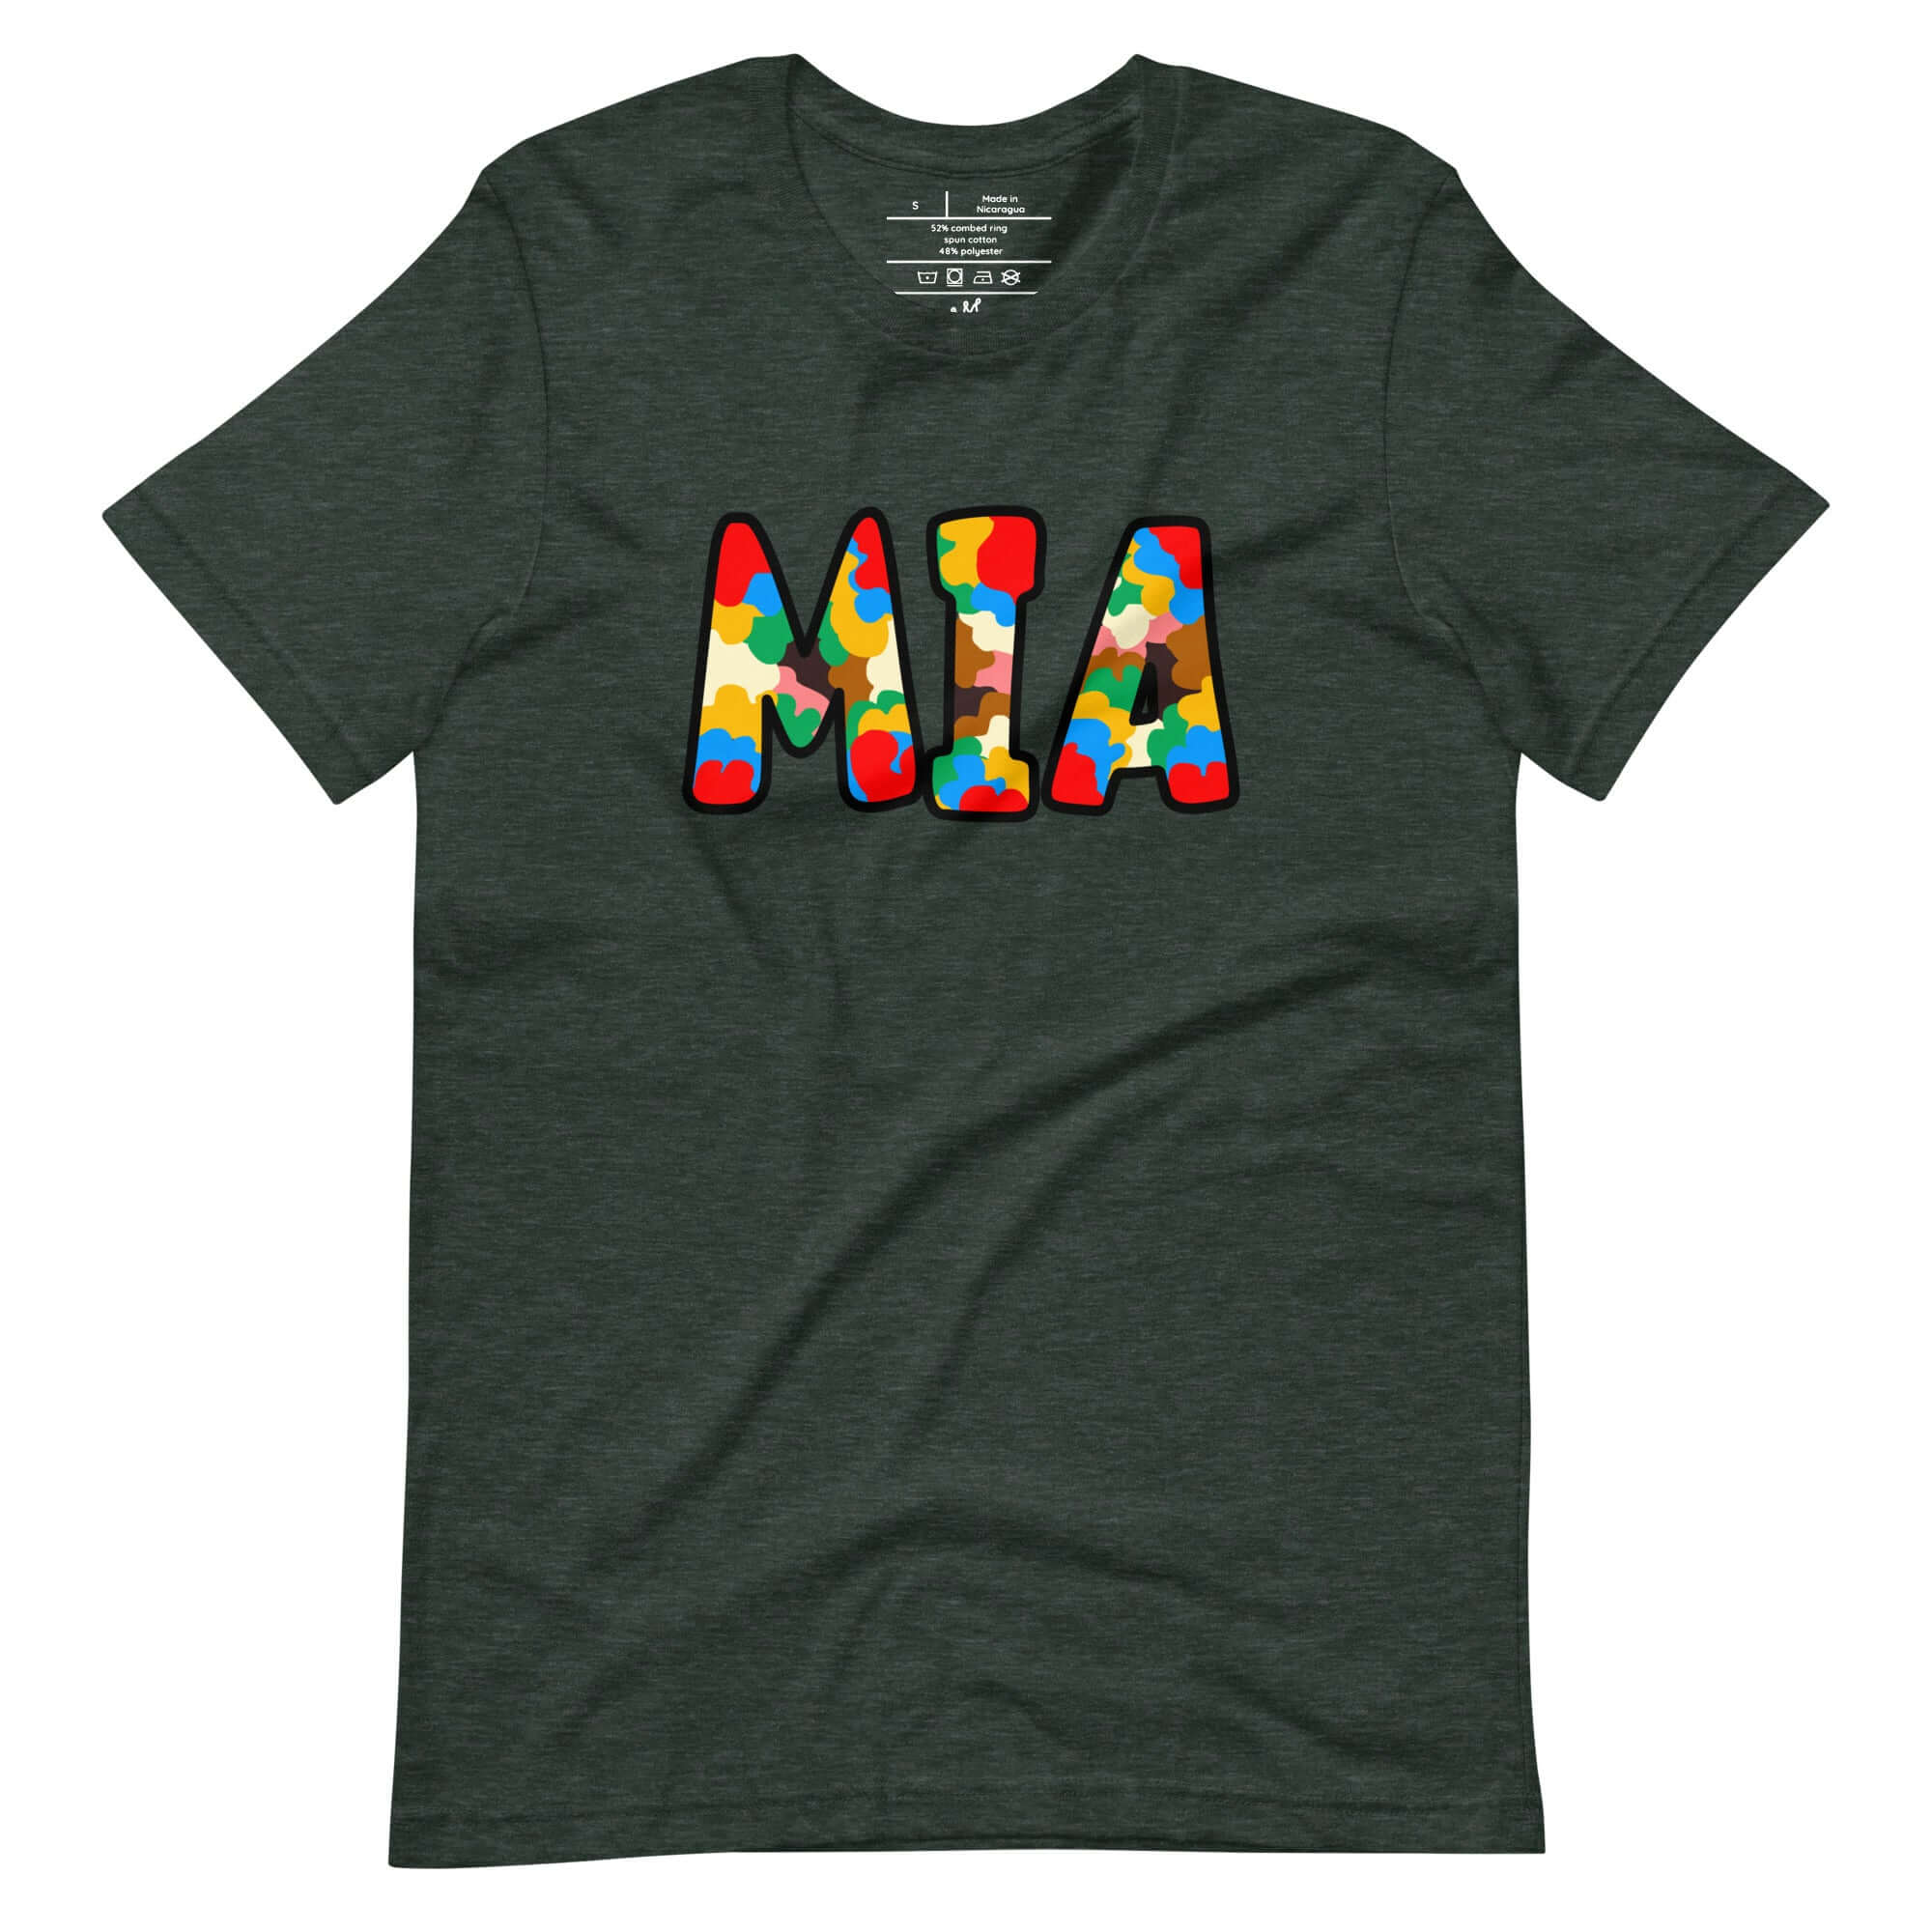 The City Collection MIA Unisex T-Shirt